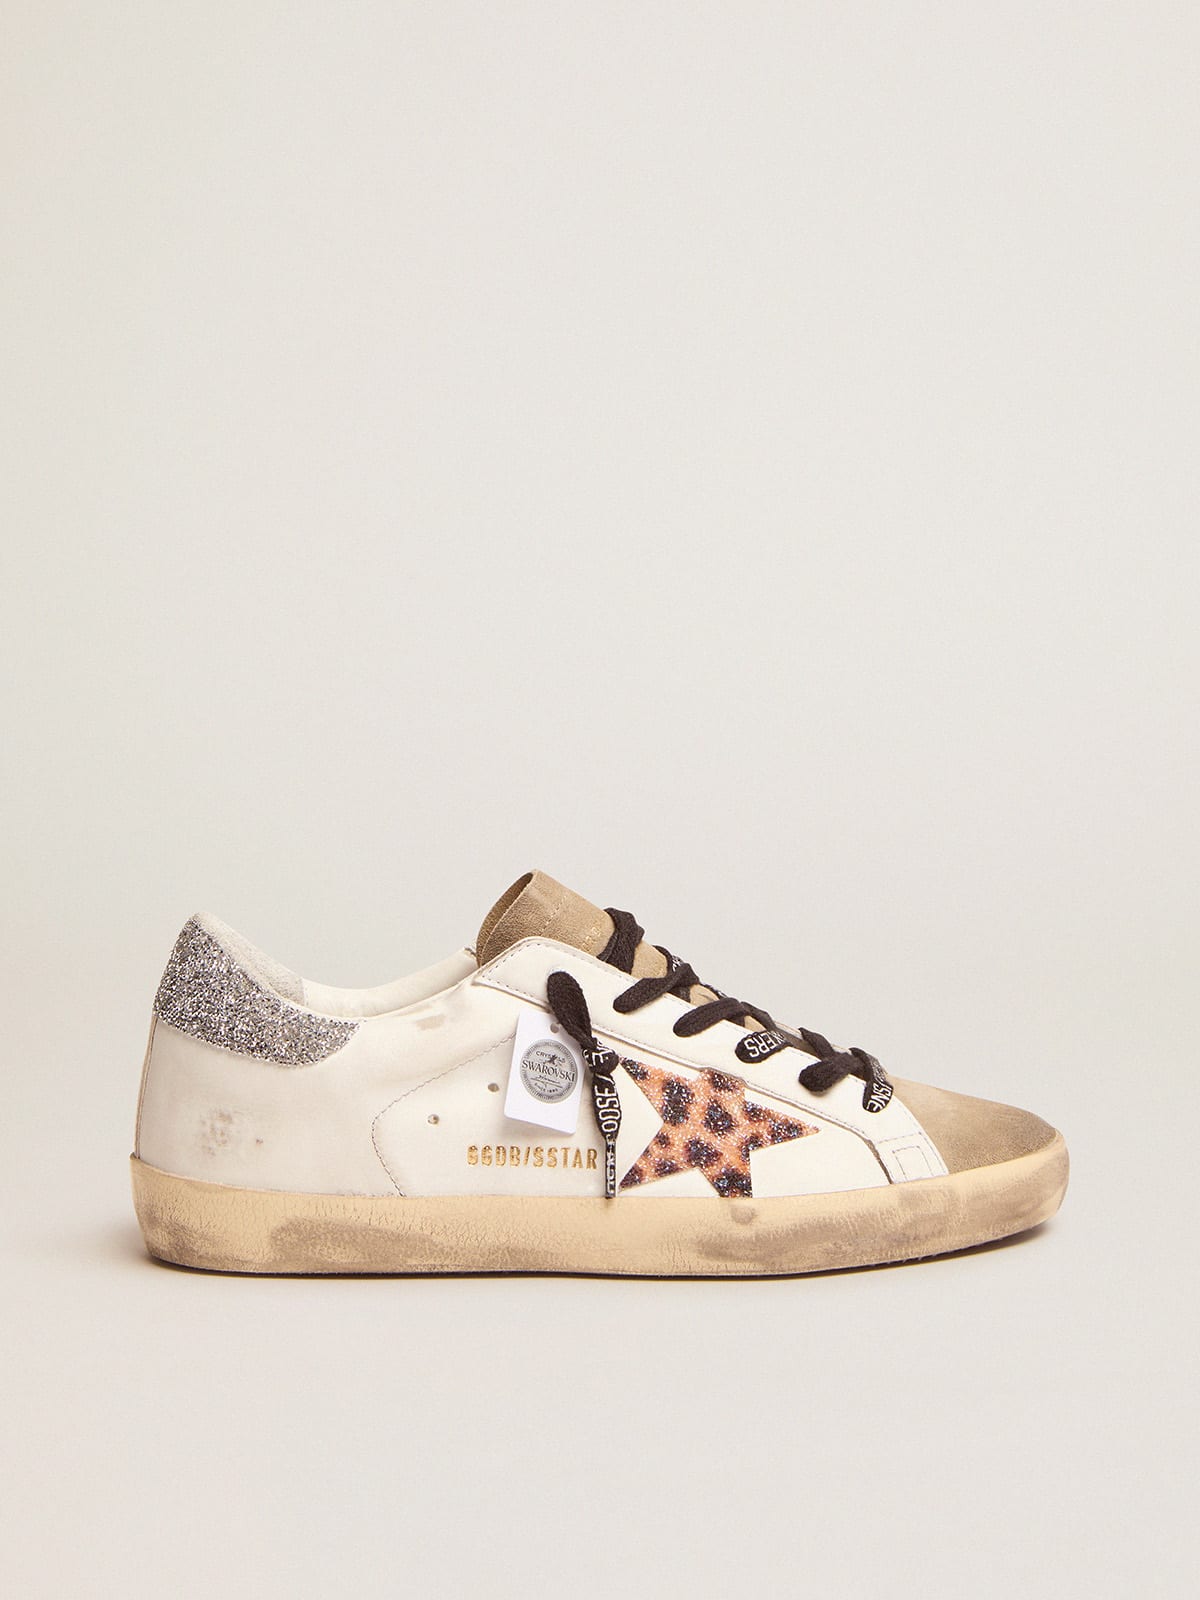 Super-Star sneakers with leopard-print crystal star and silver-colored crystal heel tab